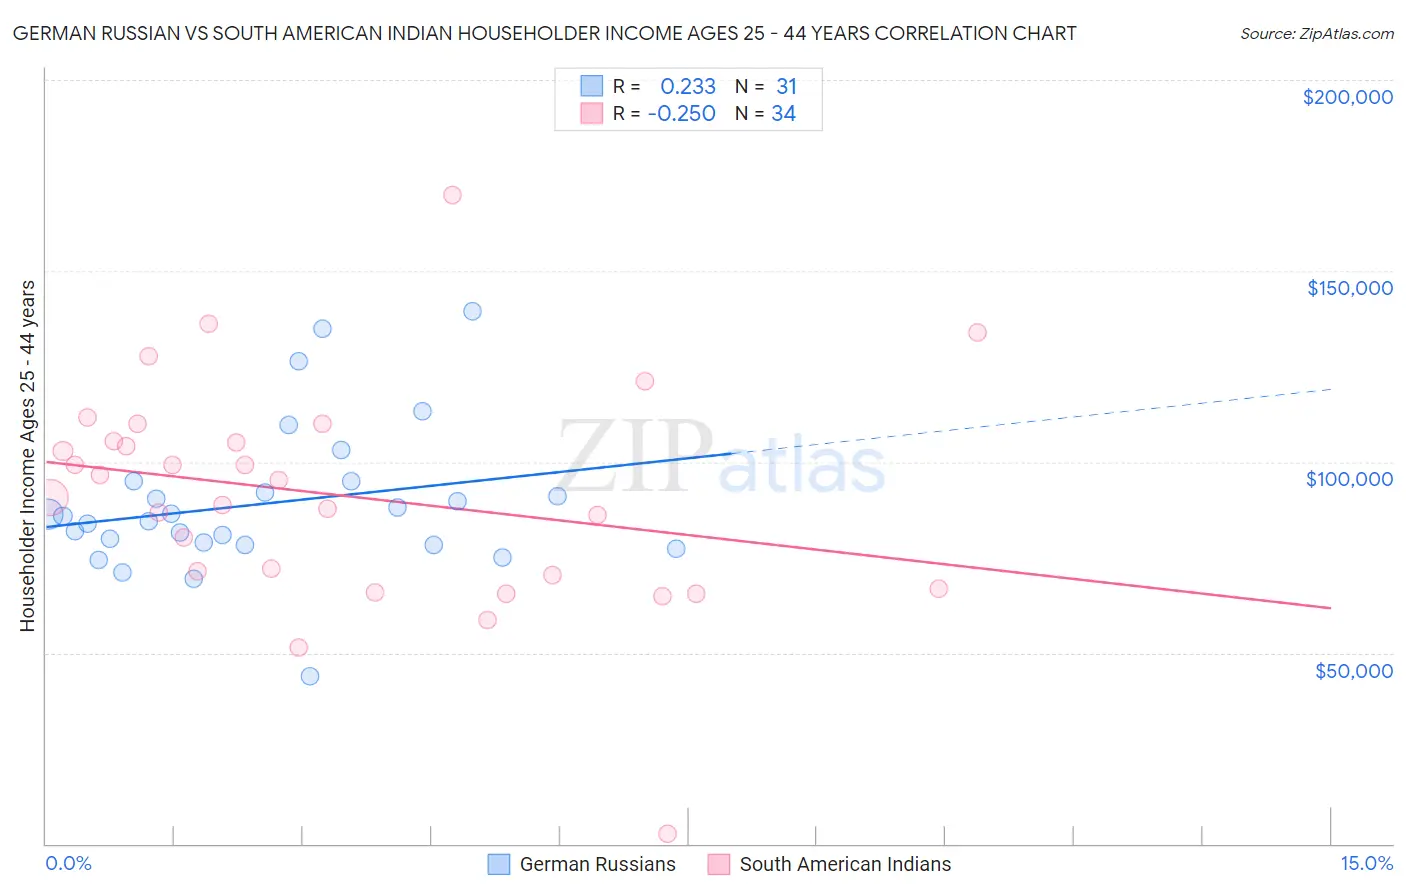 German Russian vs South American Indian Householder Income Ages 25 - 44 years